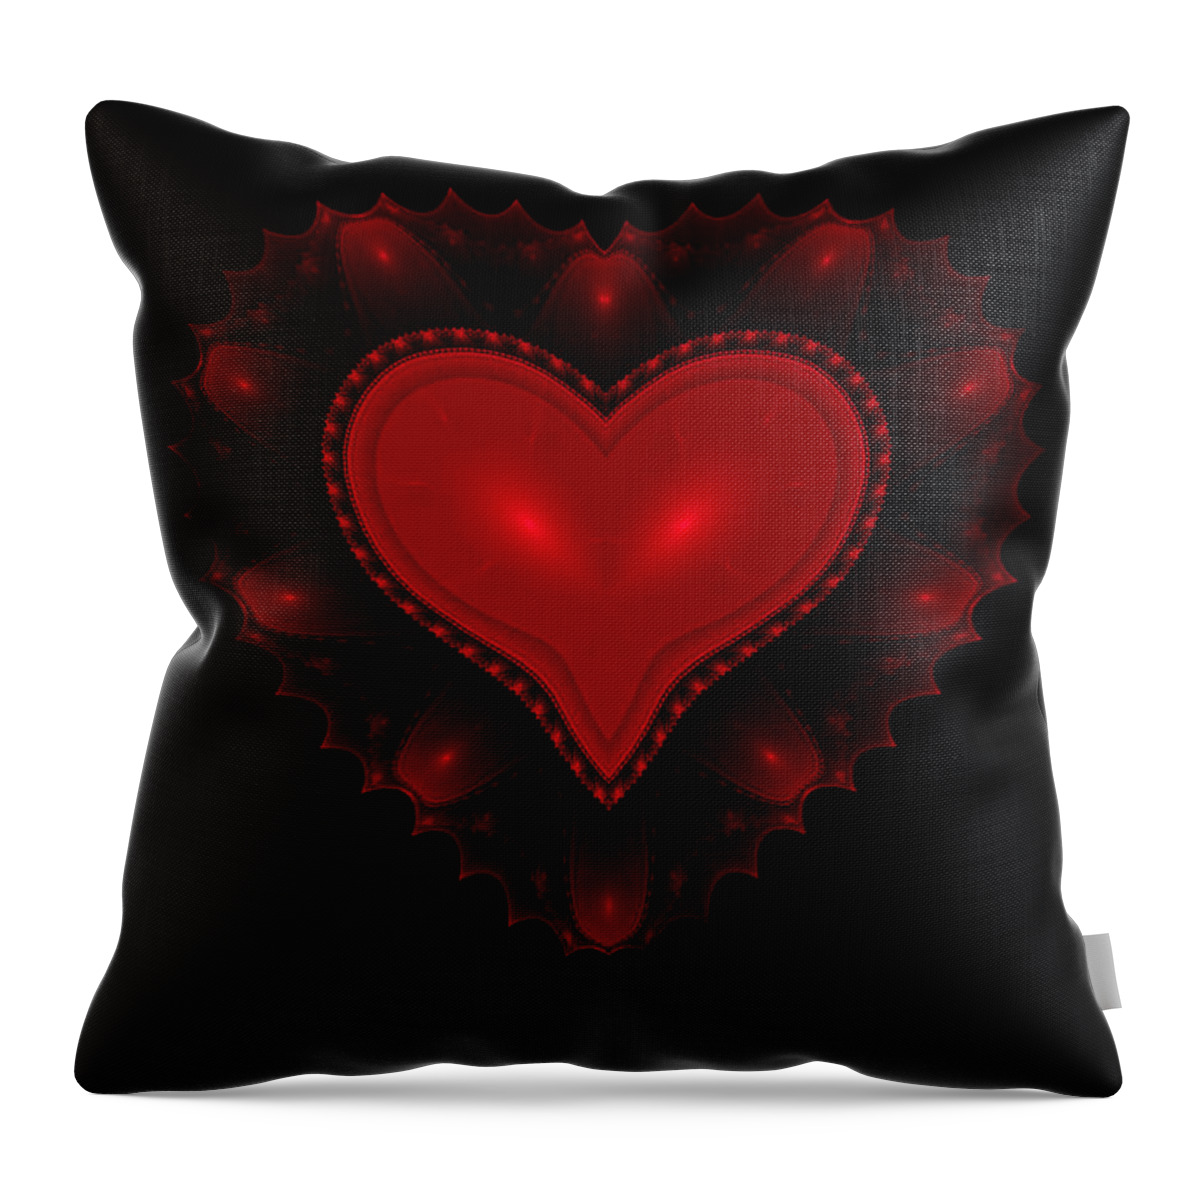 Heart Throw Pillow featuring the digital art Love by Ester McGuire